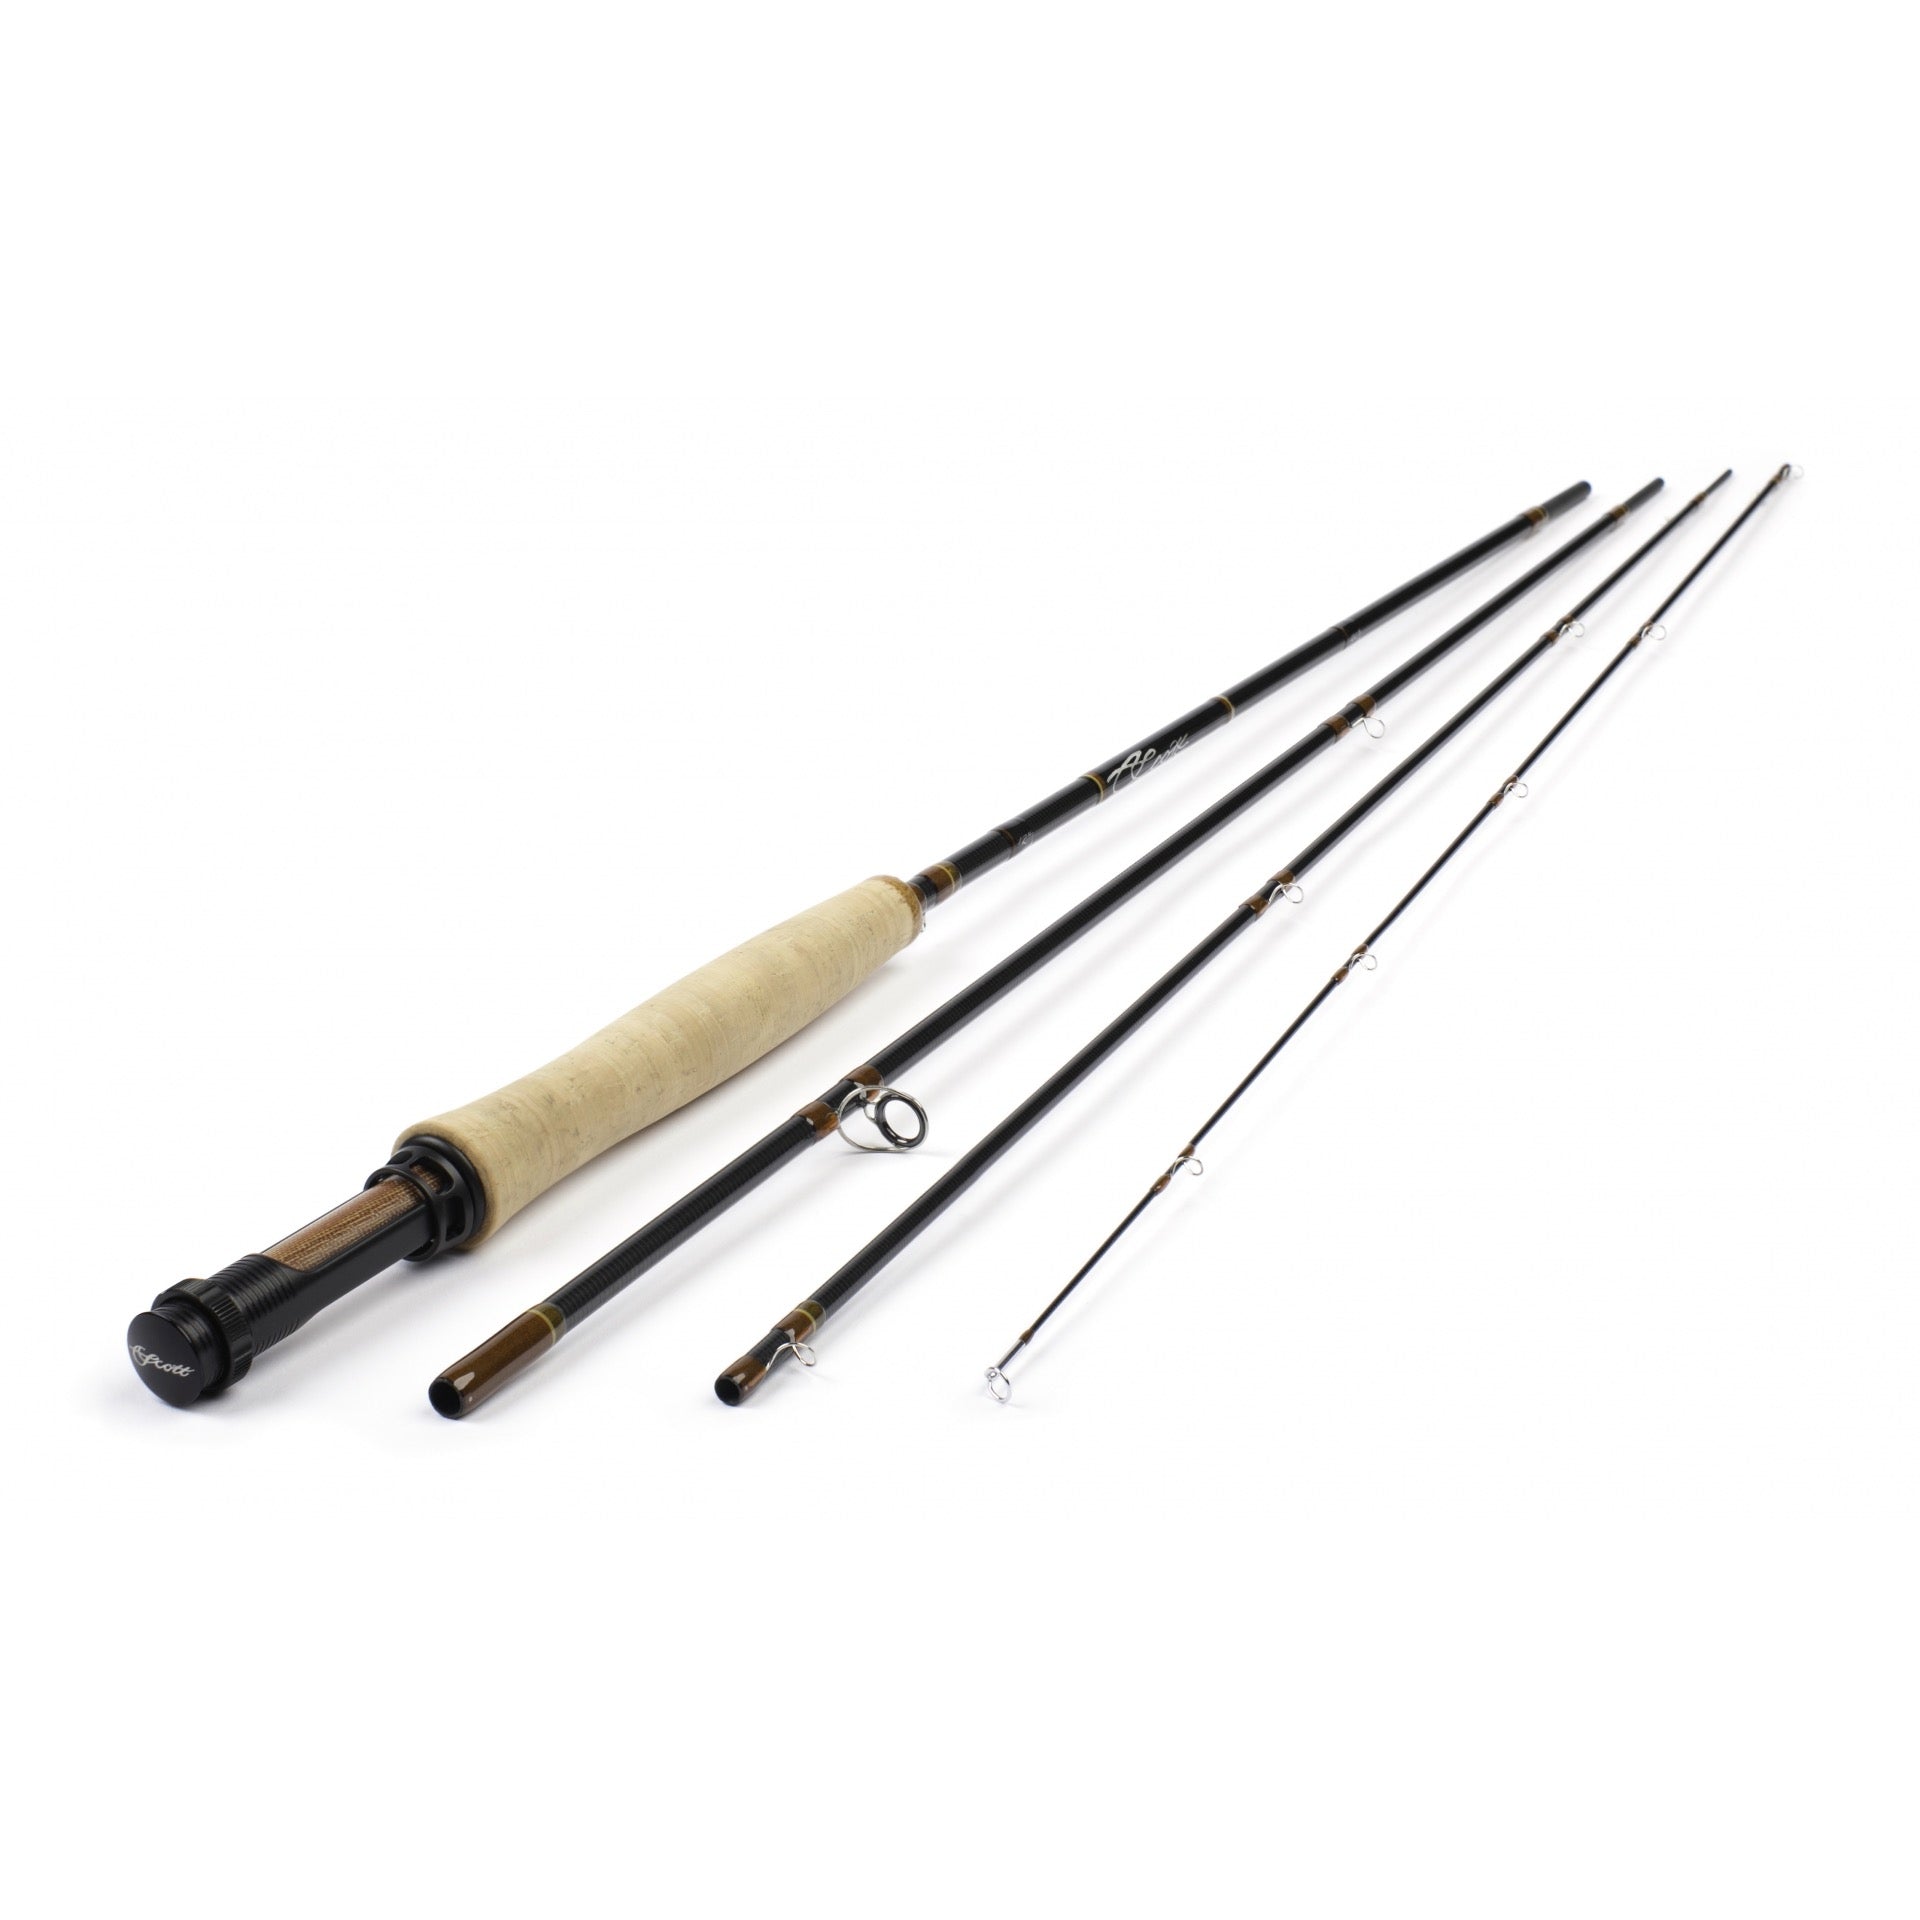 Bring it on tackle bag - Scott Fly Rods 